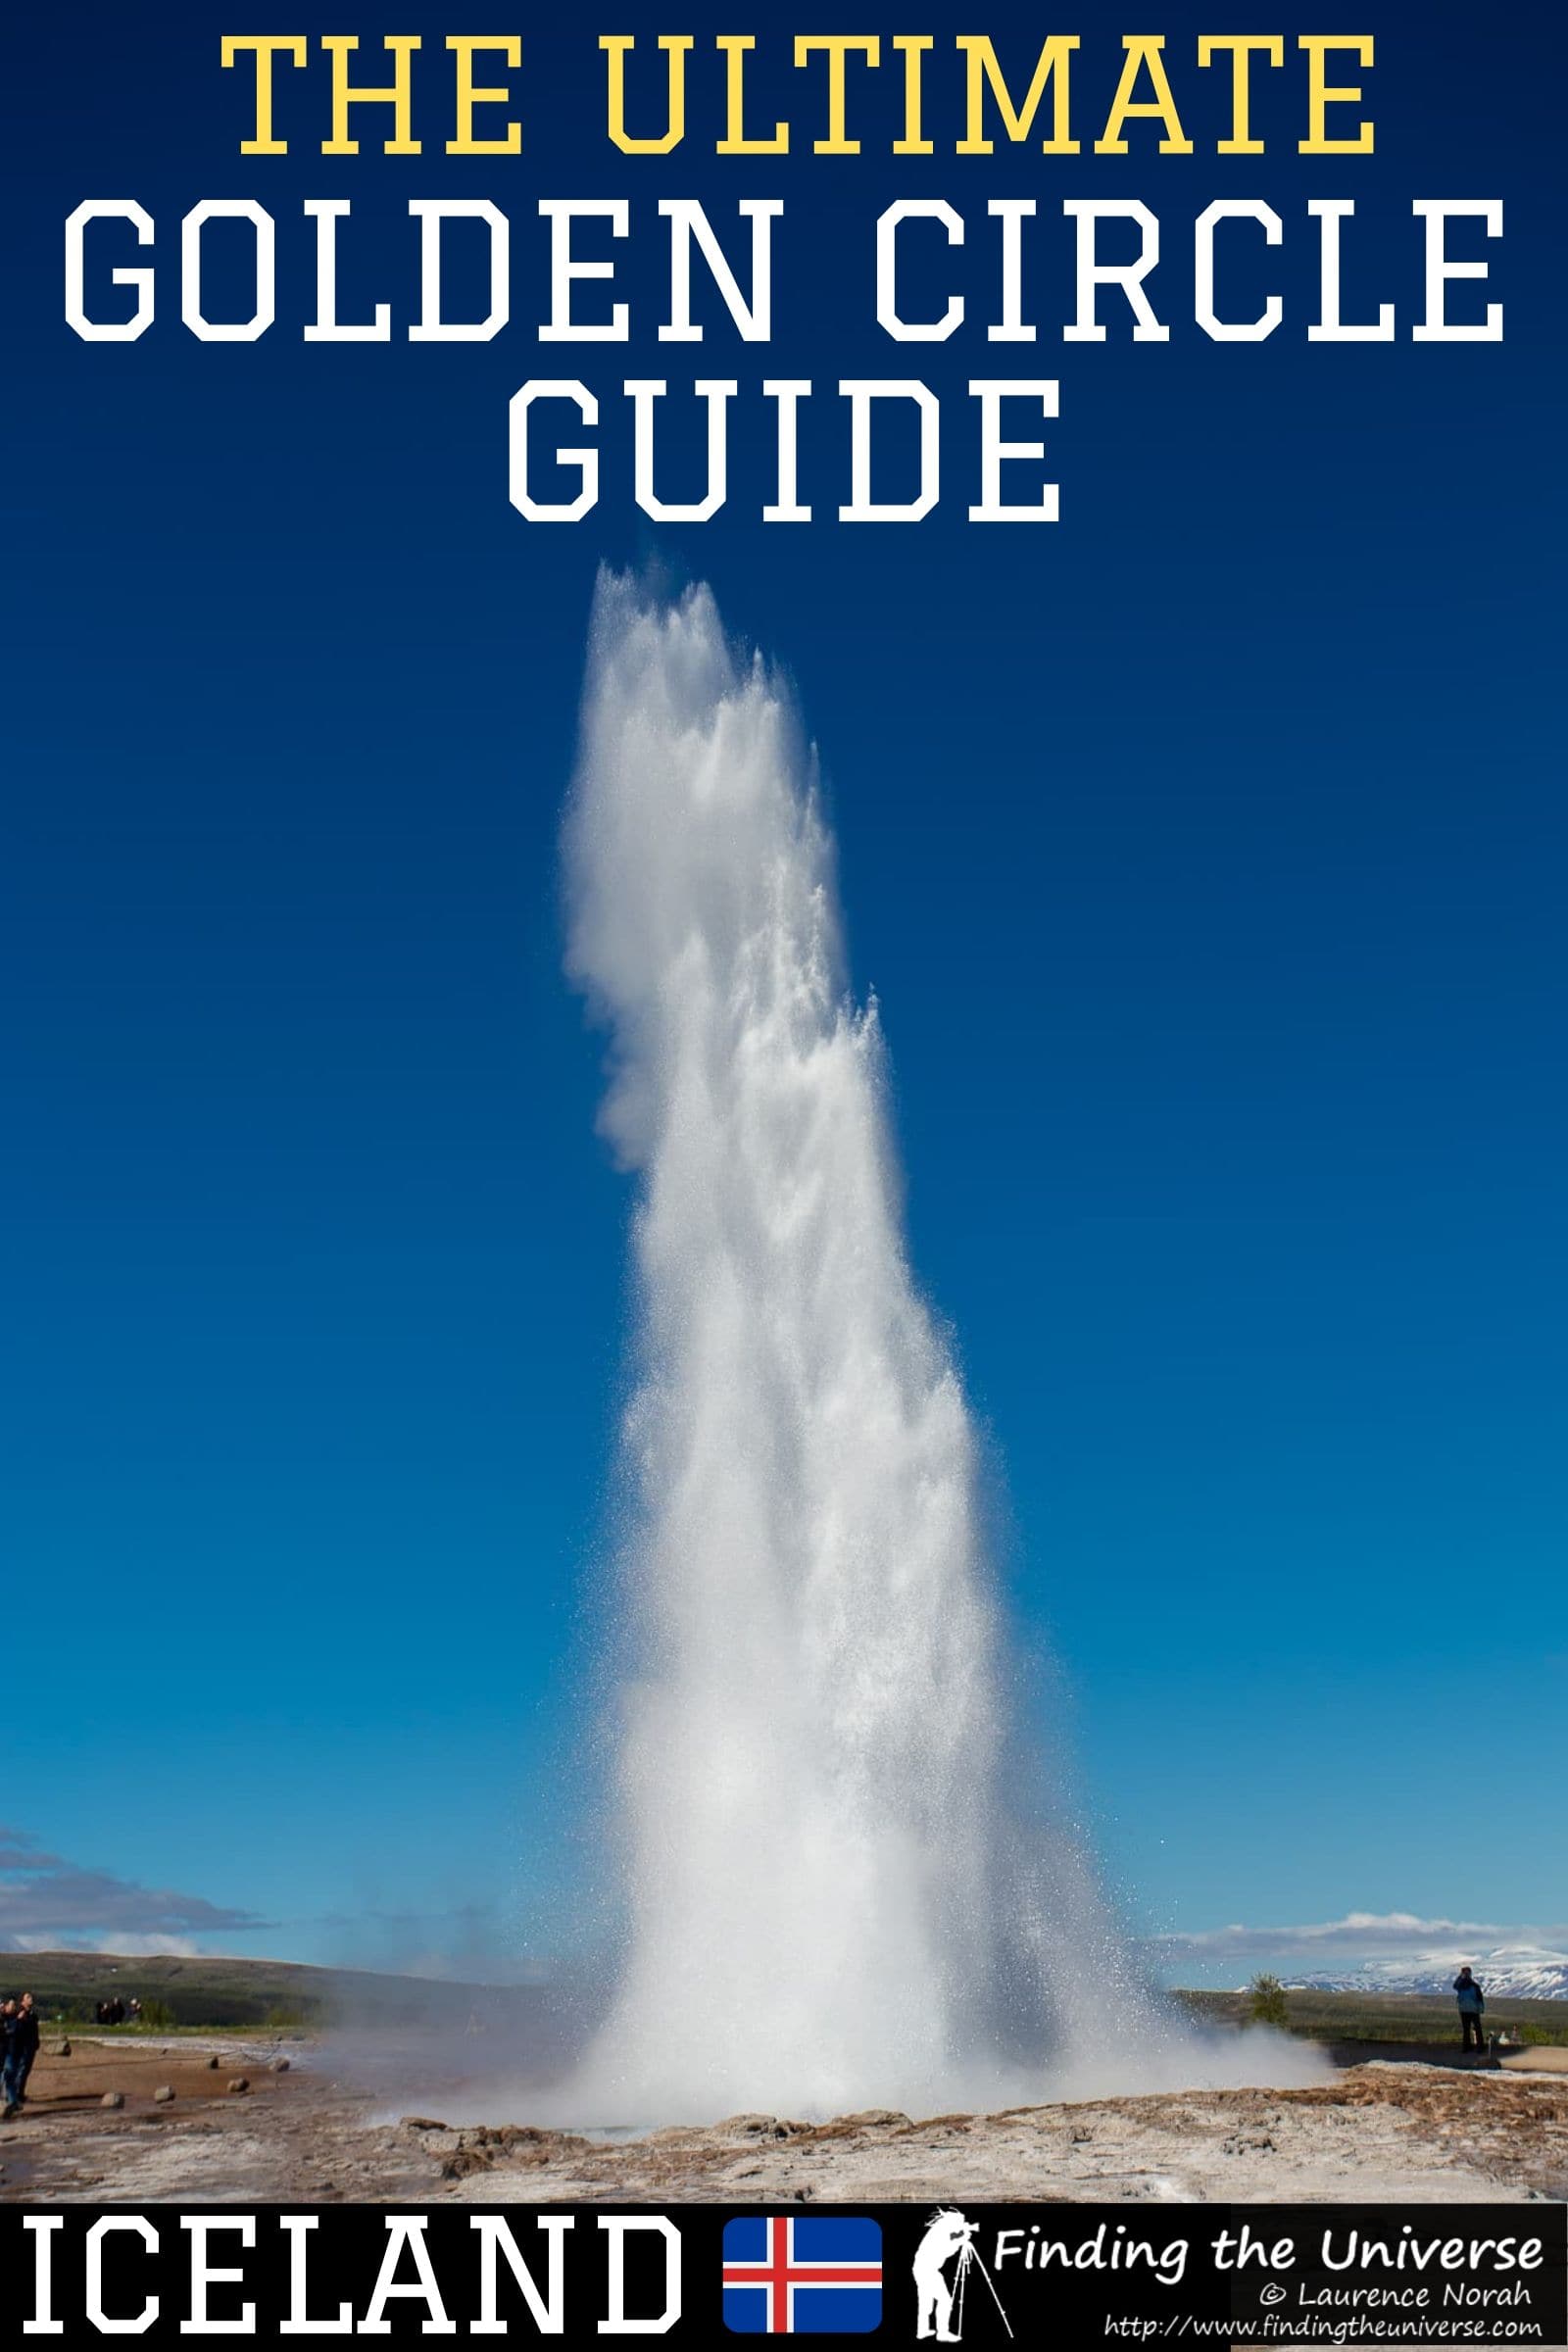 A detailed guide to exploring Iceland's Golden Circle. Covers the highlights, tips for side trips, a suggested itinerary + tour & accommodation options